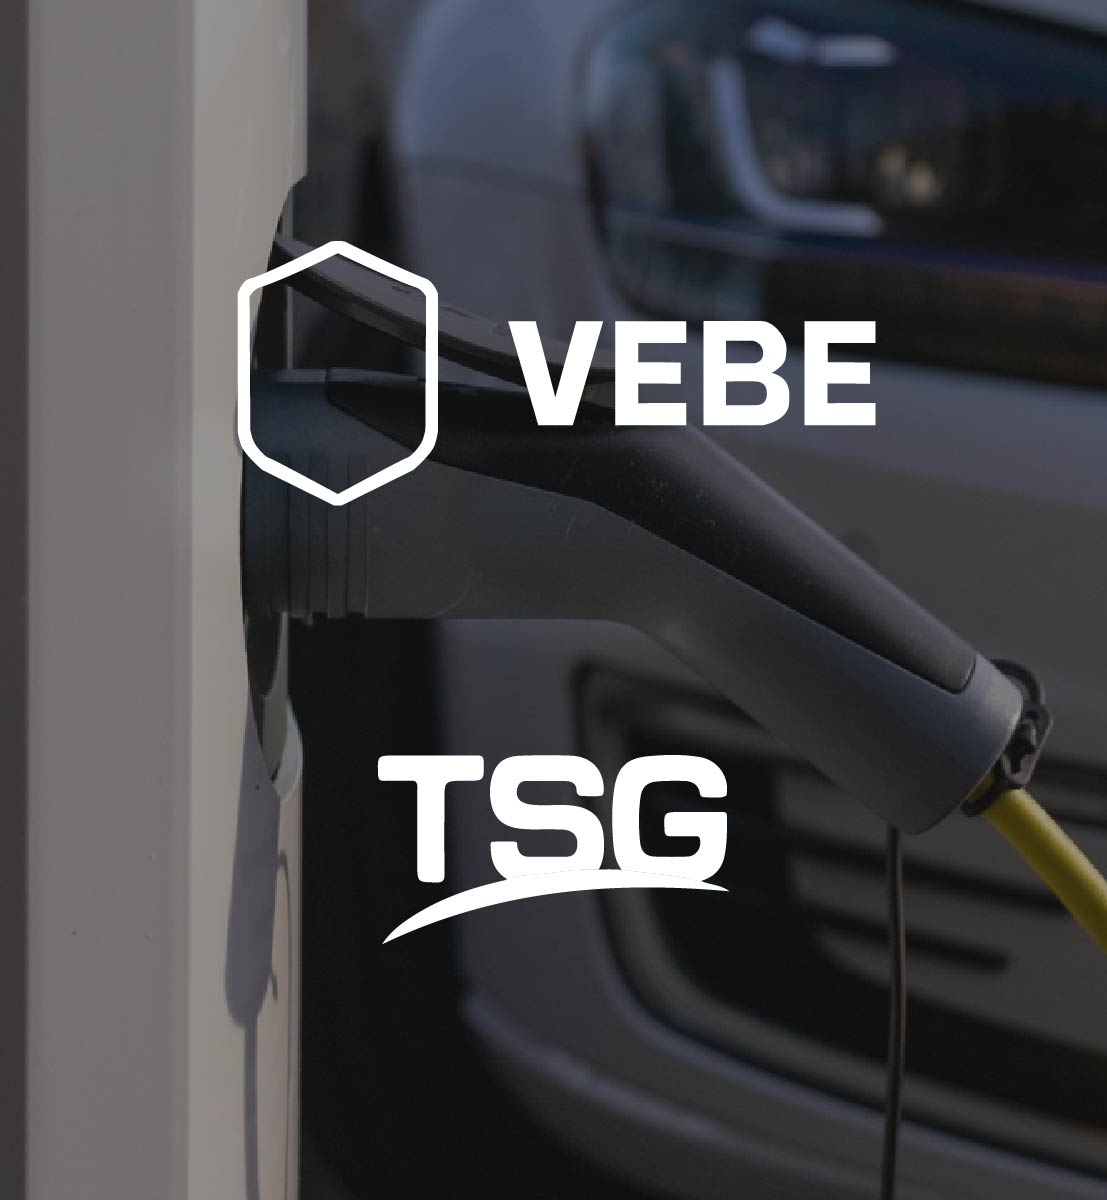 DEX international M&A, together with its French Globalscope partner Atout Capital, acted as M&A advisor to TSG on the acquisition of VEBE